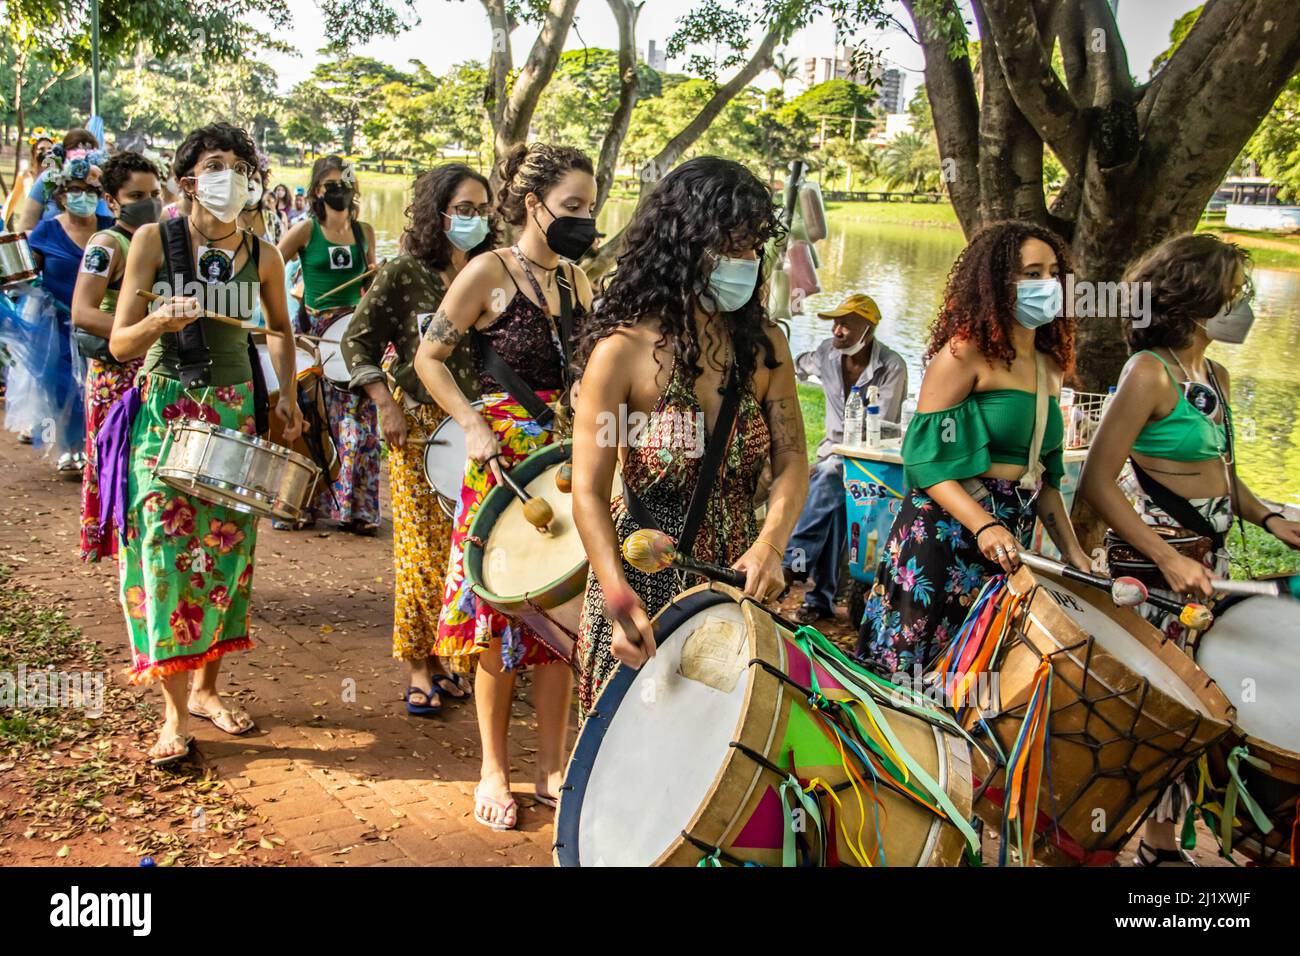 Goiânia, Goias, Brazil – March 01, 2022:  Detail of a group of women percussionists. Photo taken during the Carnival performance in a public. Stock Photo